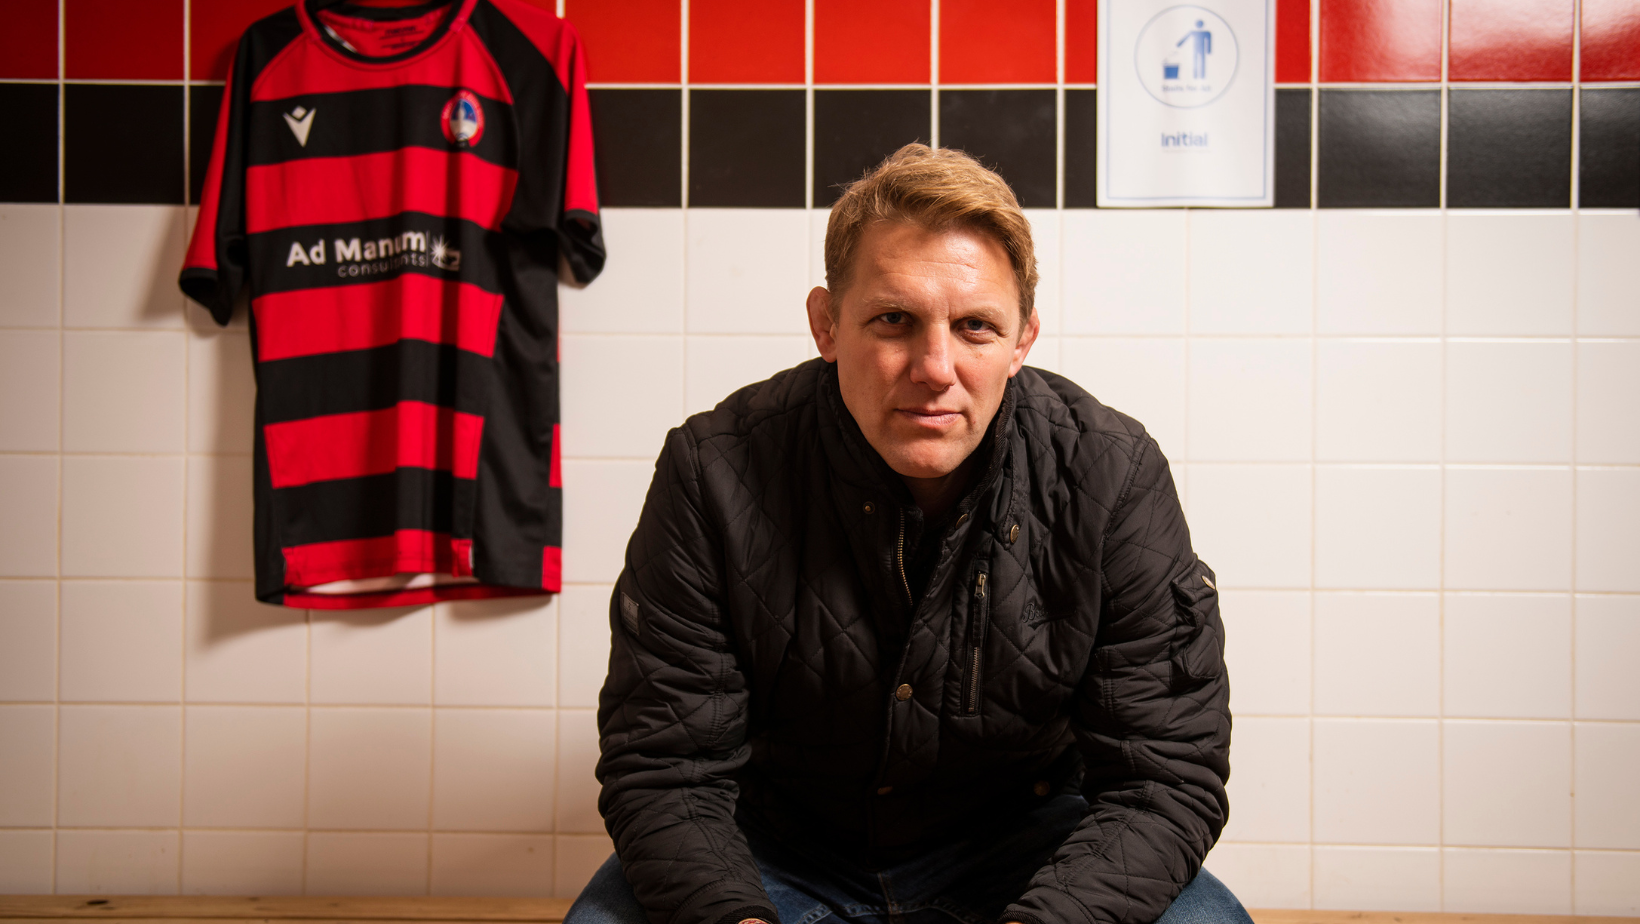 An image of Lewis Moody MBE for the Stalls For All campaign sat on a bench with a rugby t-shirt in the background